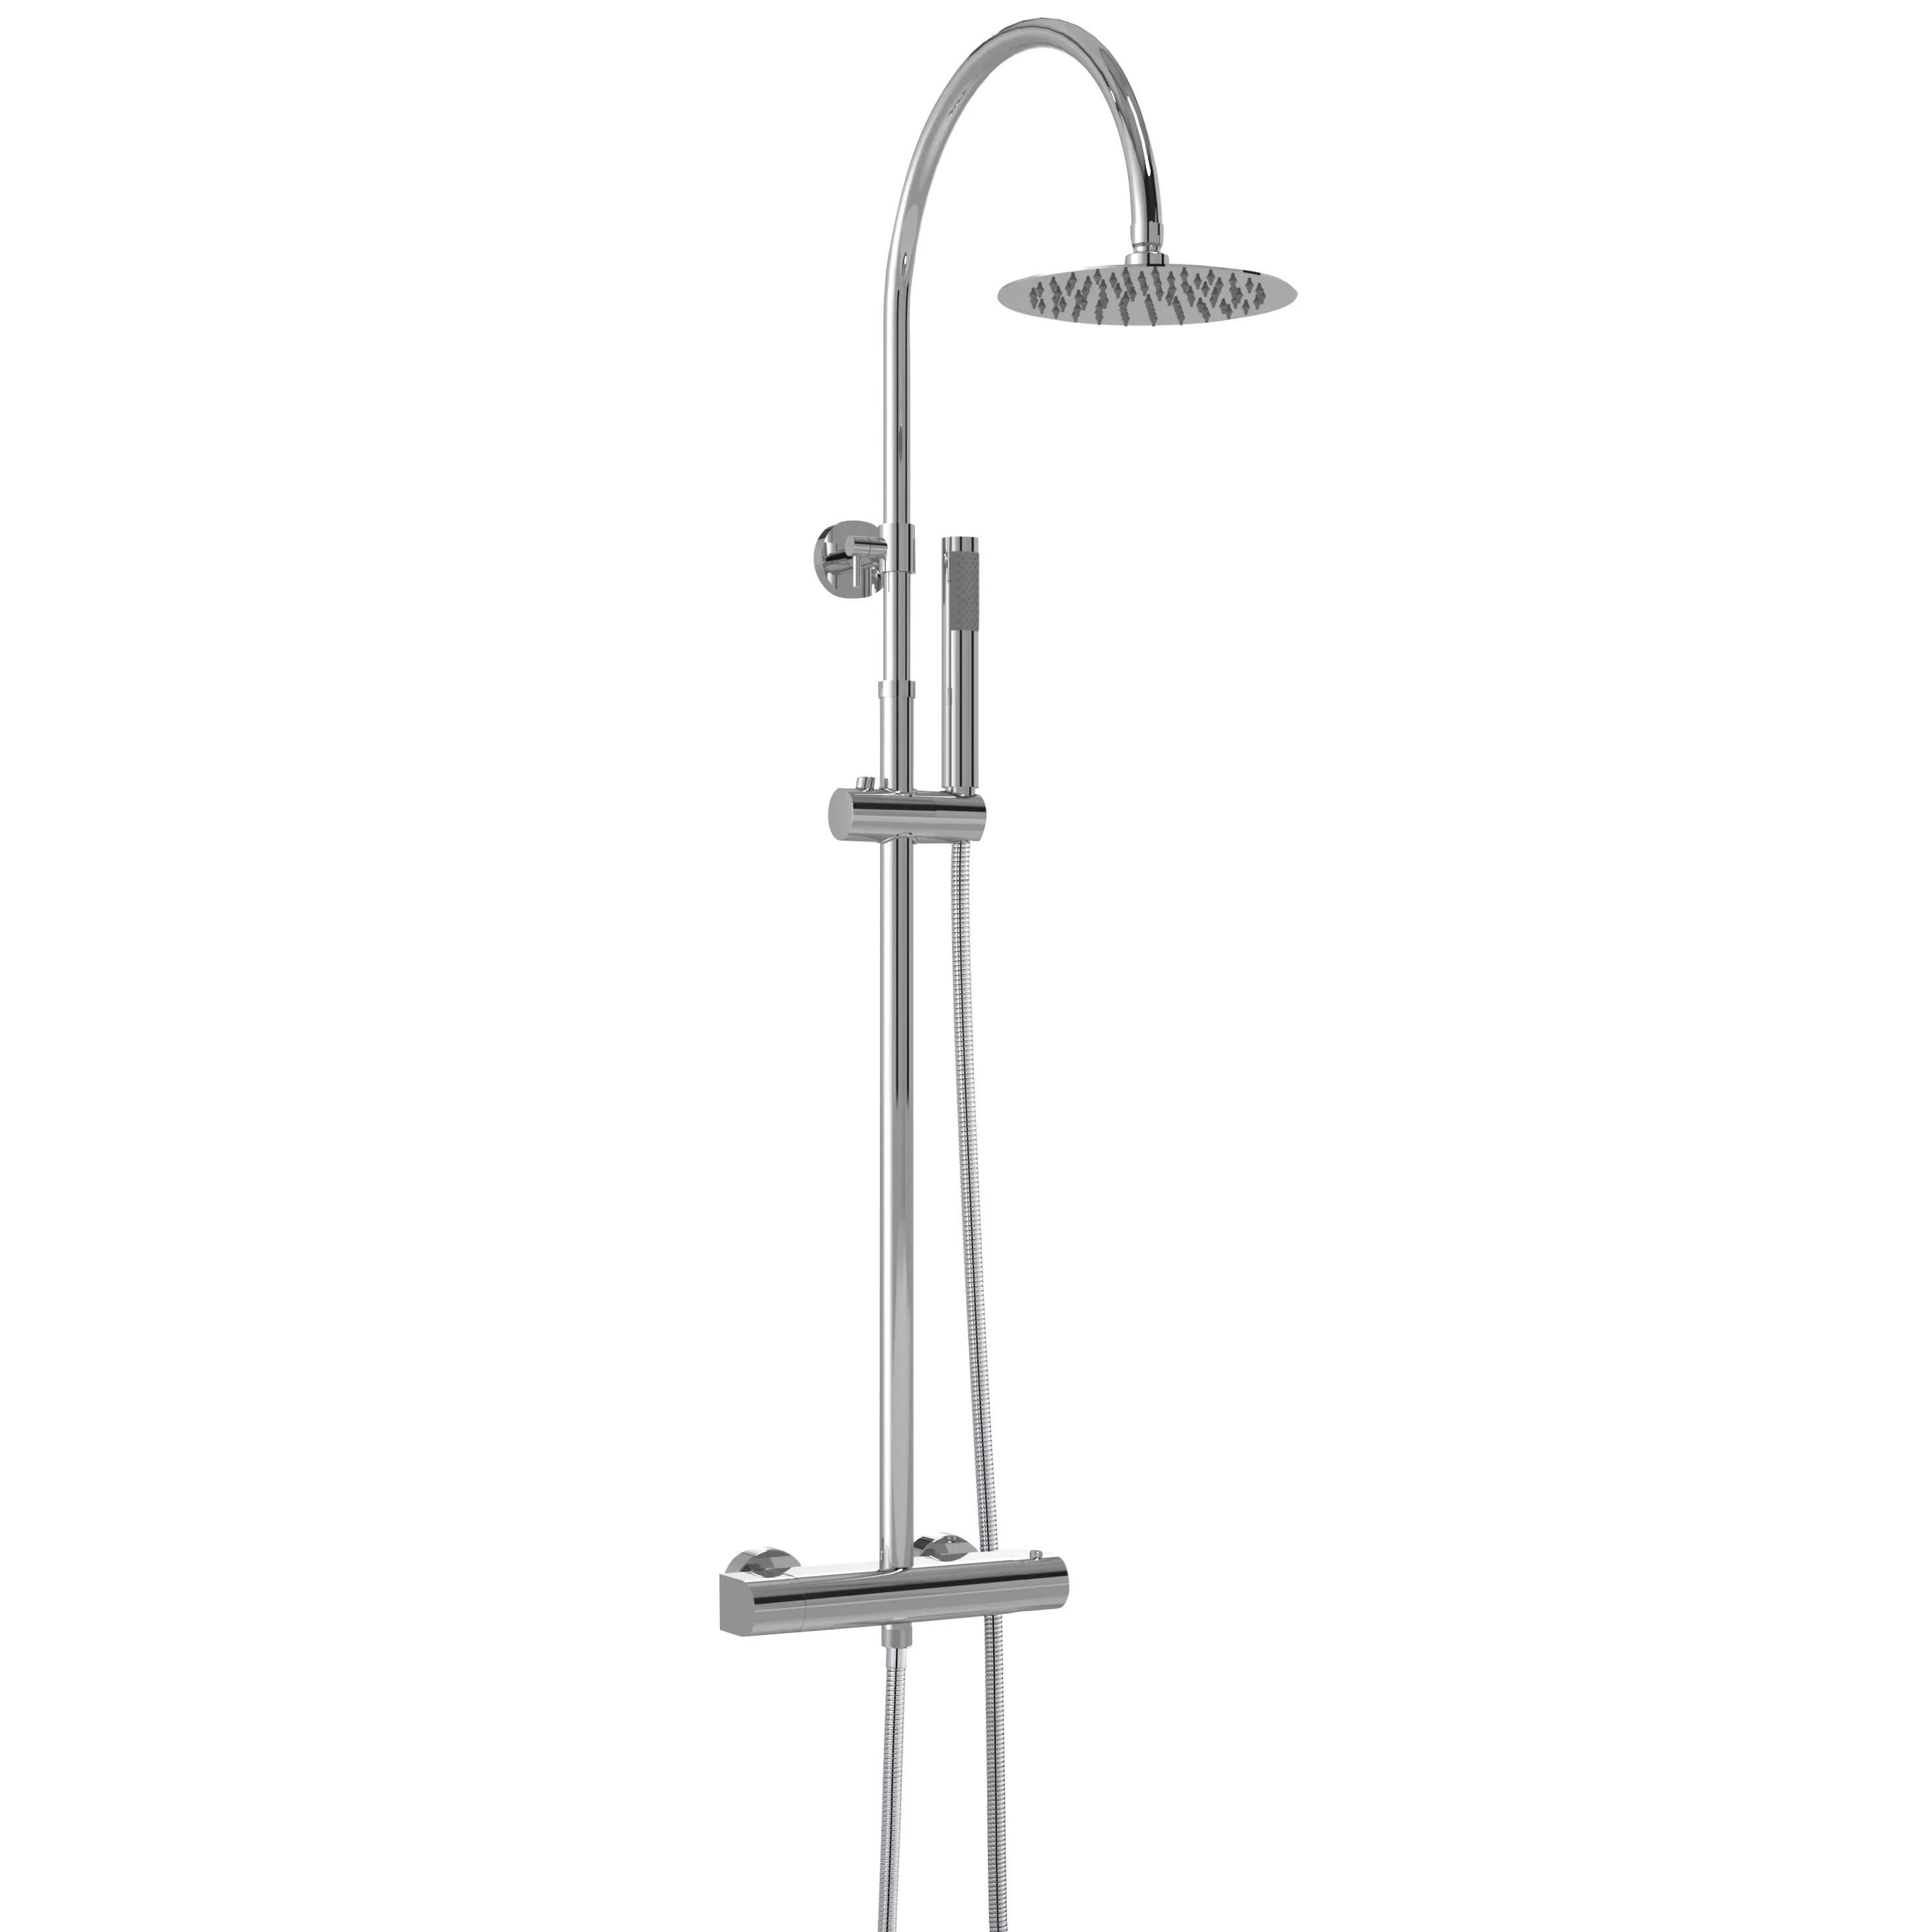 Hudson Reed Round Bar Valve Thermostatic Mixer Shower with Fixed and Adjustable Heads - Chrome